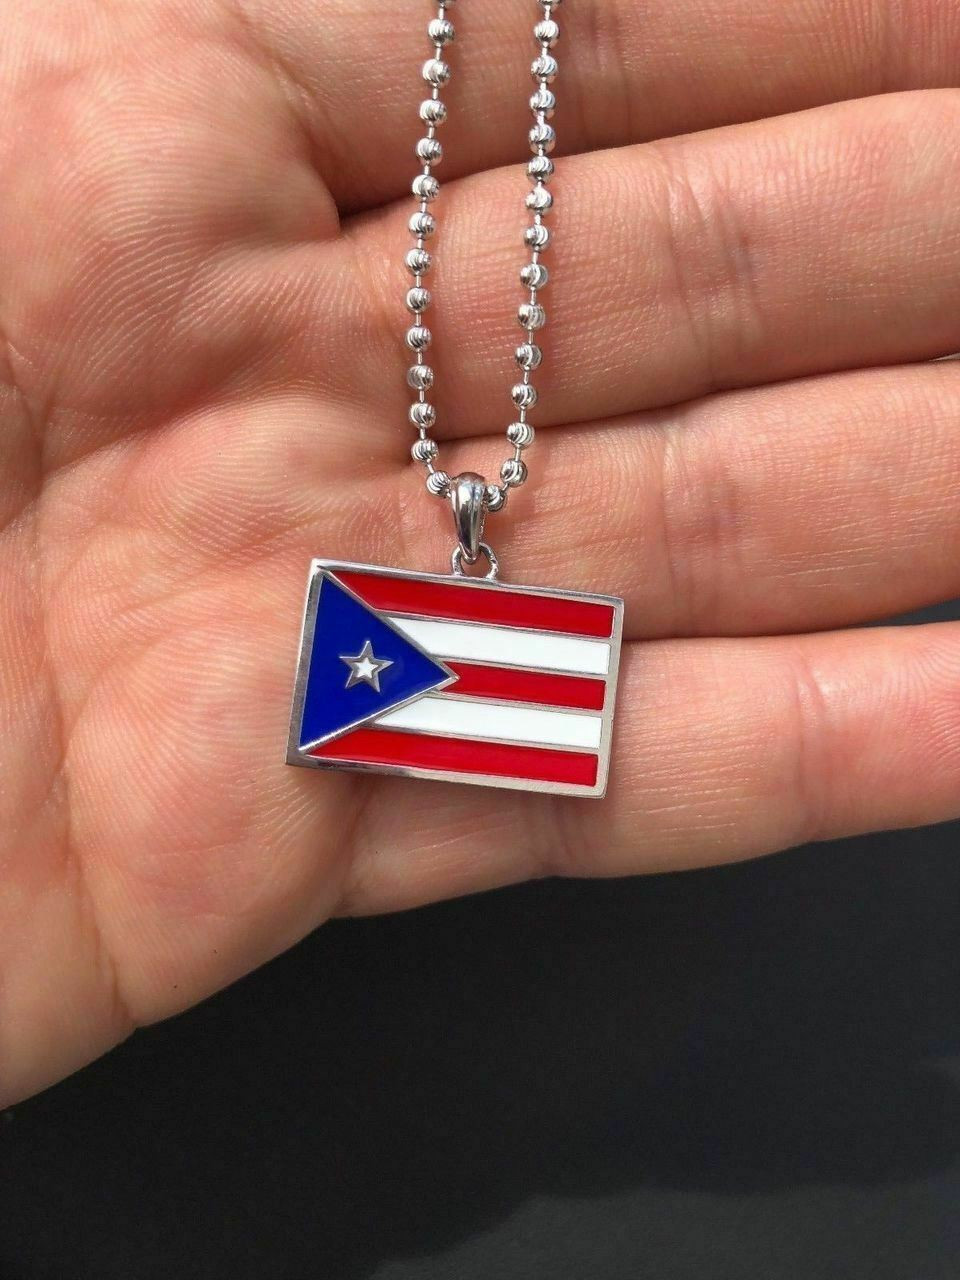 Amazon.com: AO-00699 Handmade Jewelry Heart Puerto Rico Map and Color Flag  Pendant Necklaces Gold Color/Silver Color PR Puerto Ricans Jewelry - (  Type: Silver Color/Len: 45cm Thin Chain ) : Arts, Crafts